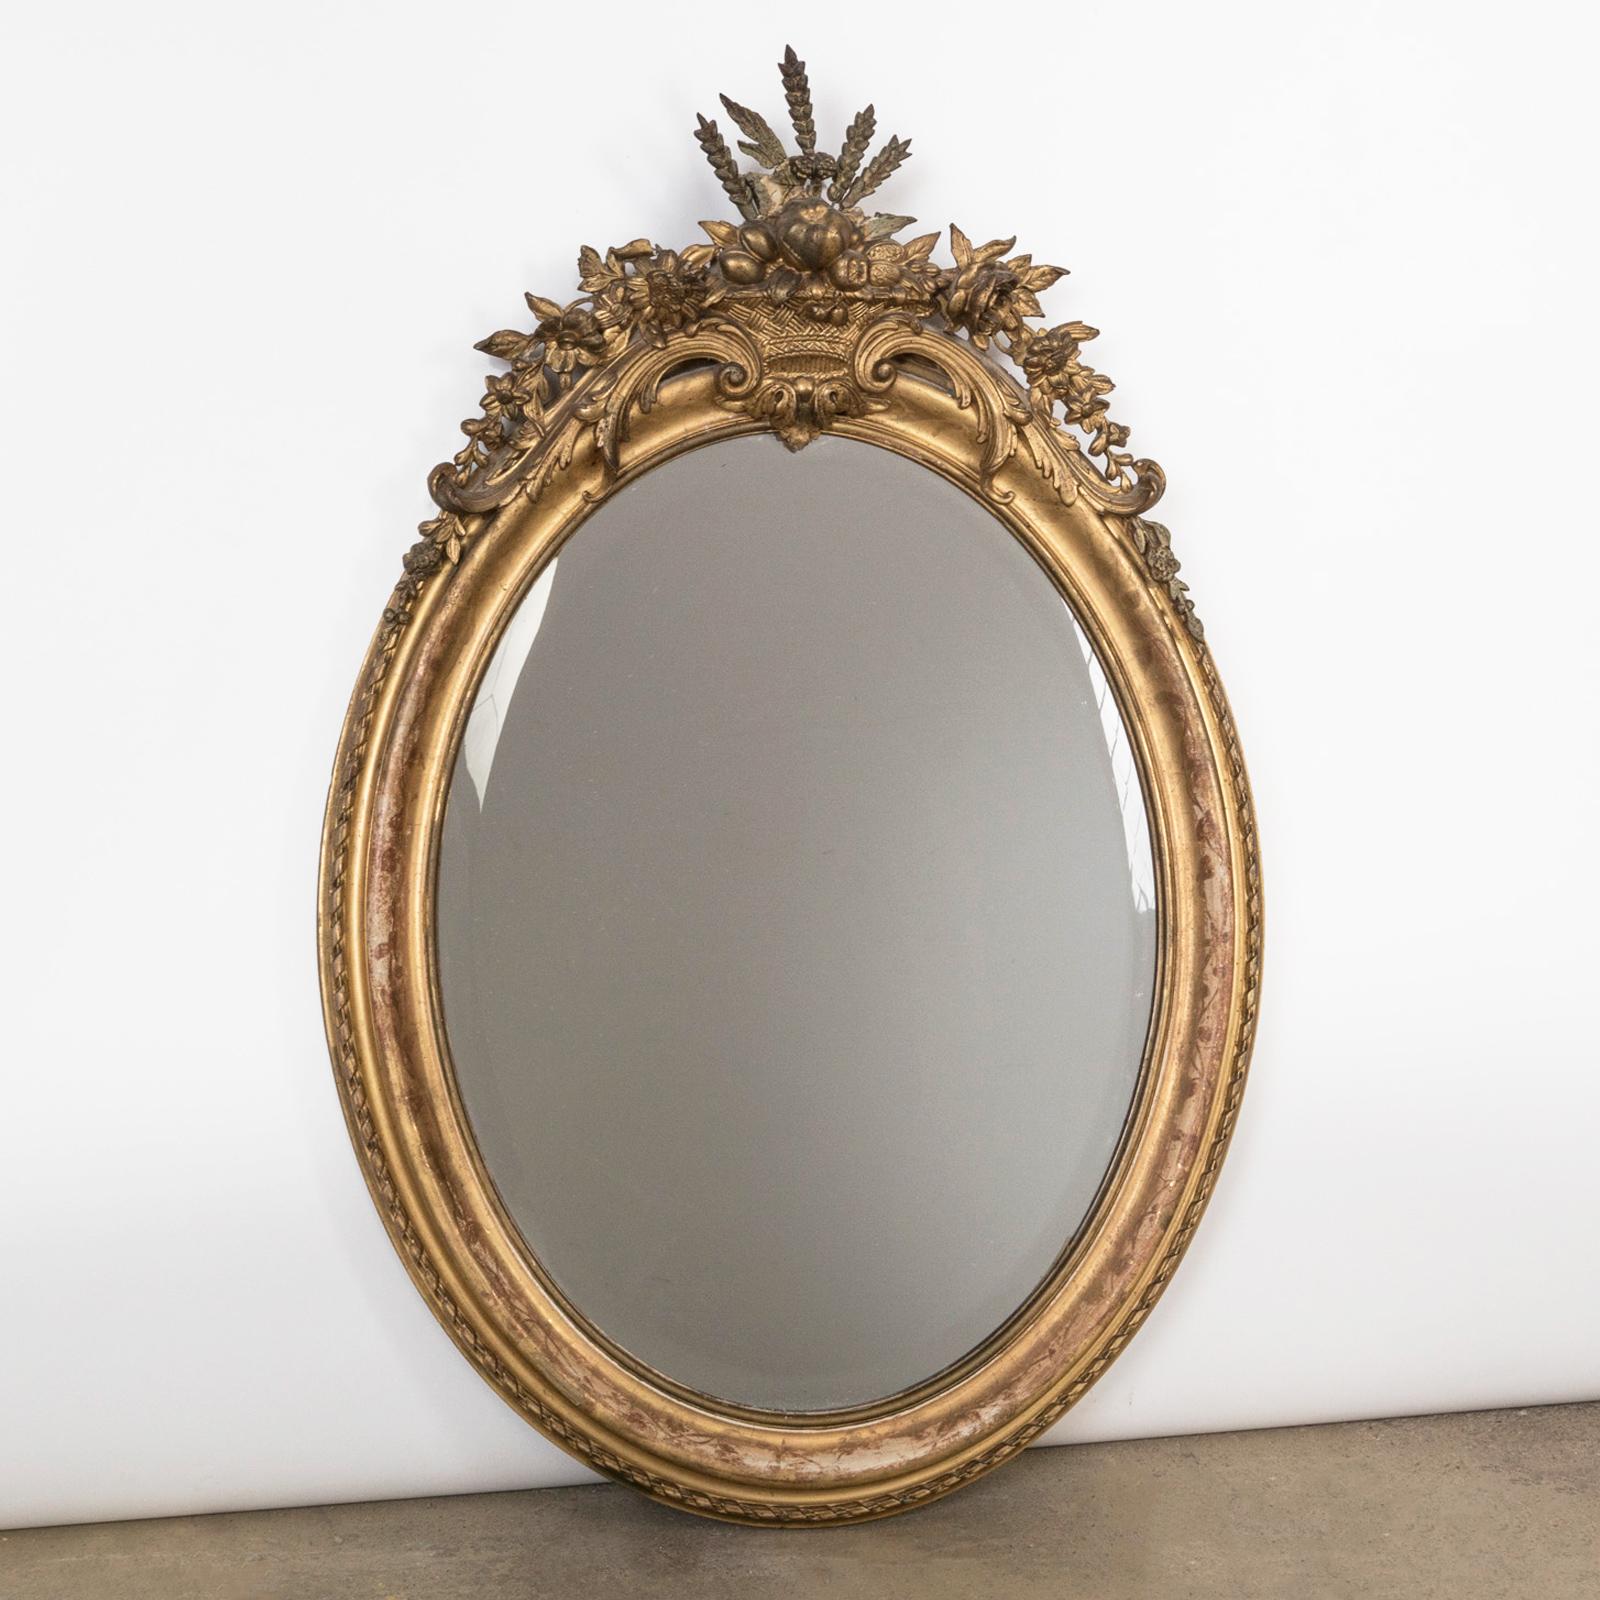 Antique 19th Century French oval gold leaf gilt mirror with a basket fruit and flower shaped crest.

A beautiful antique oval mirror that was made in France, circa 1880.

The mirror frame is decorated with an elegant top ornament in the form of